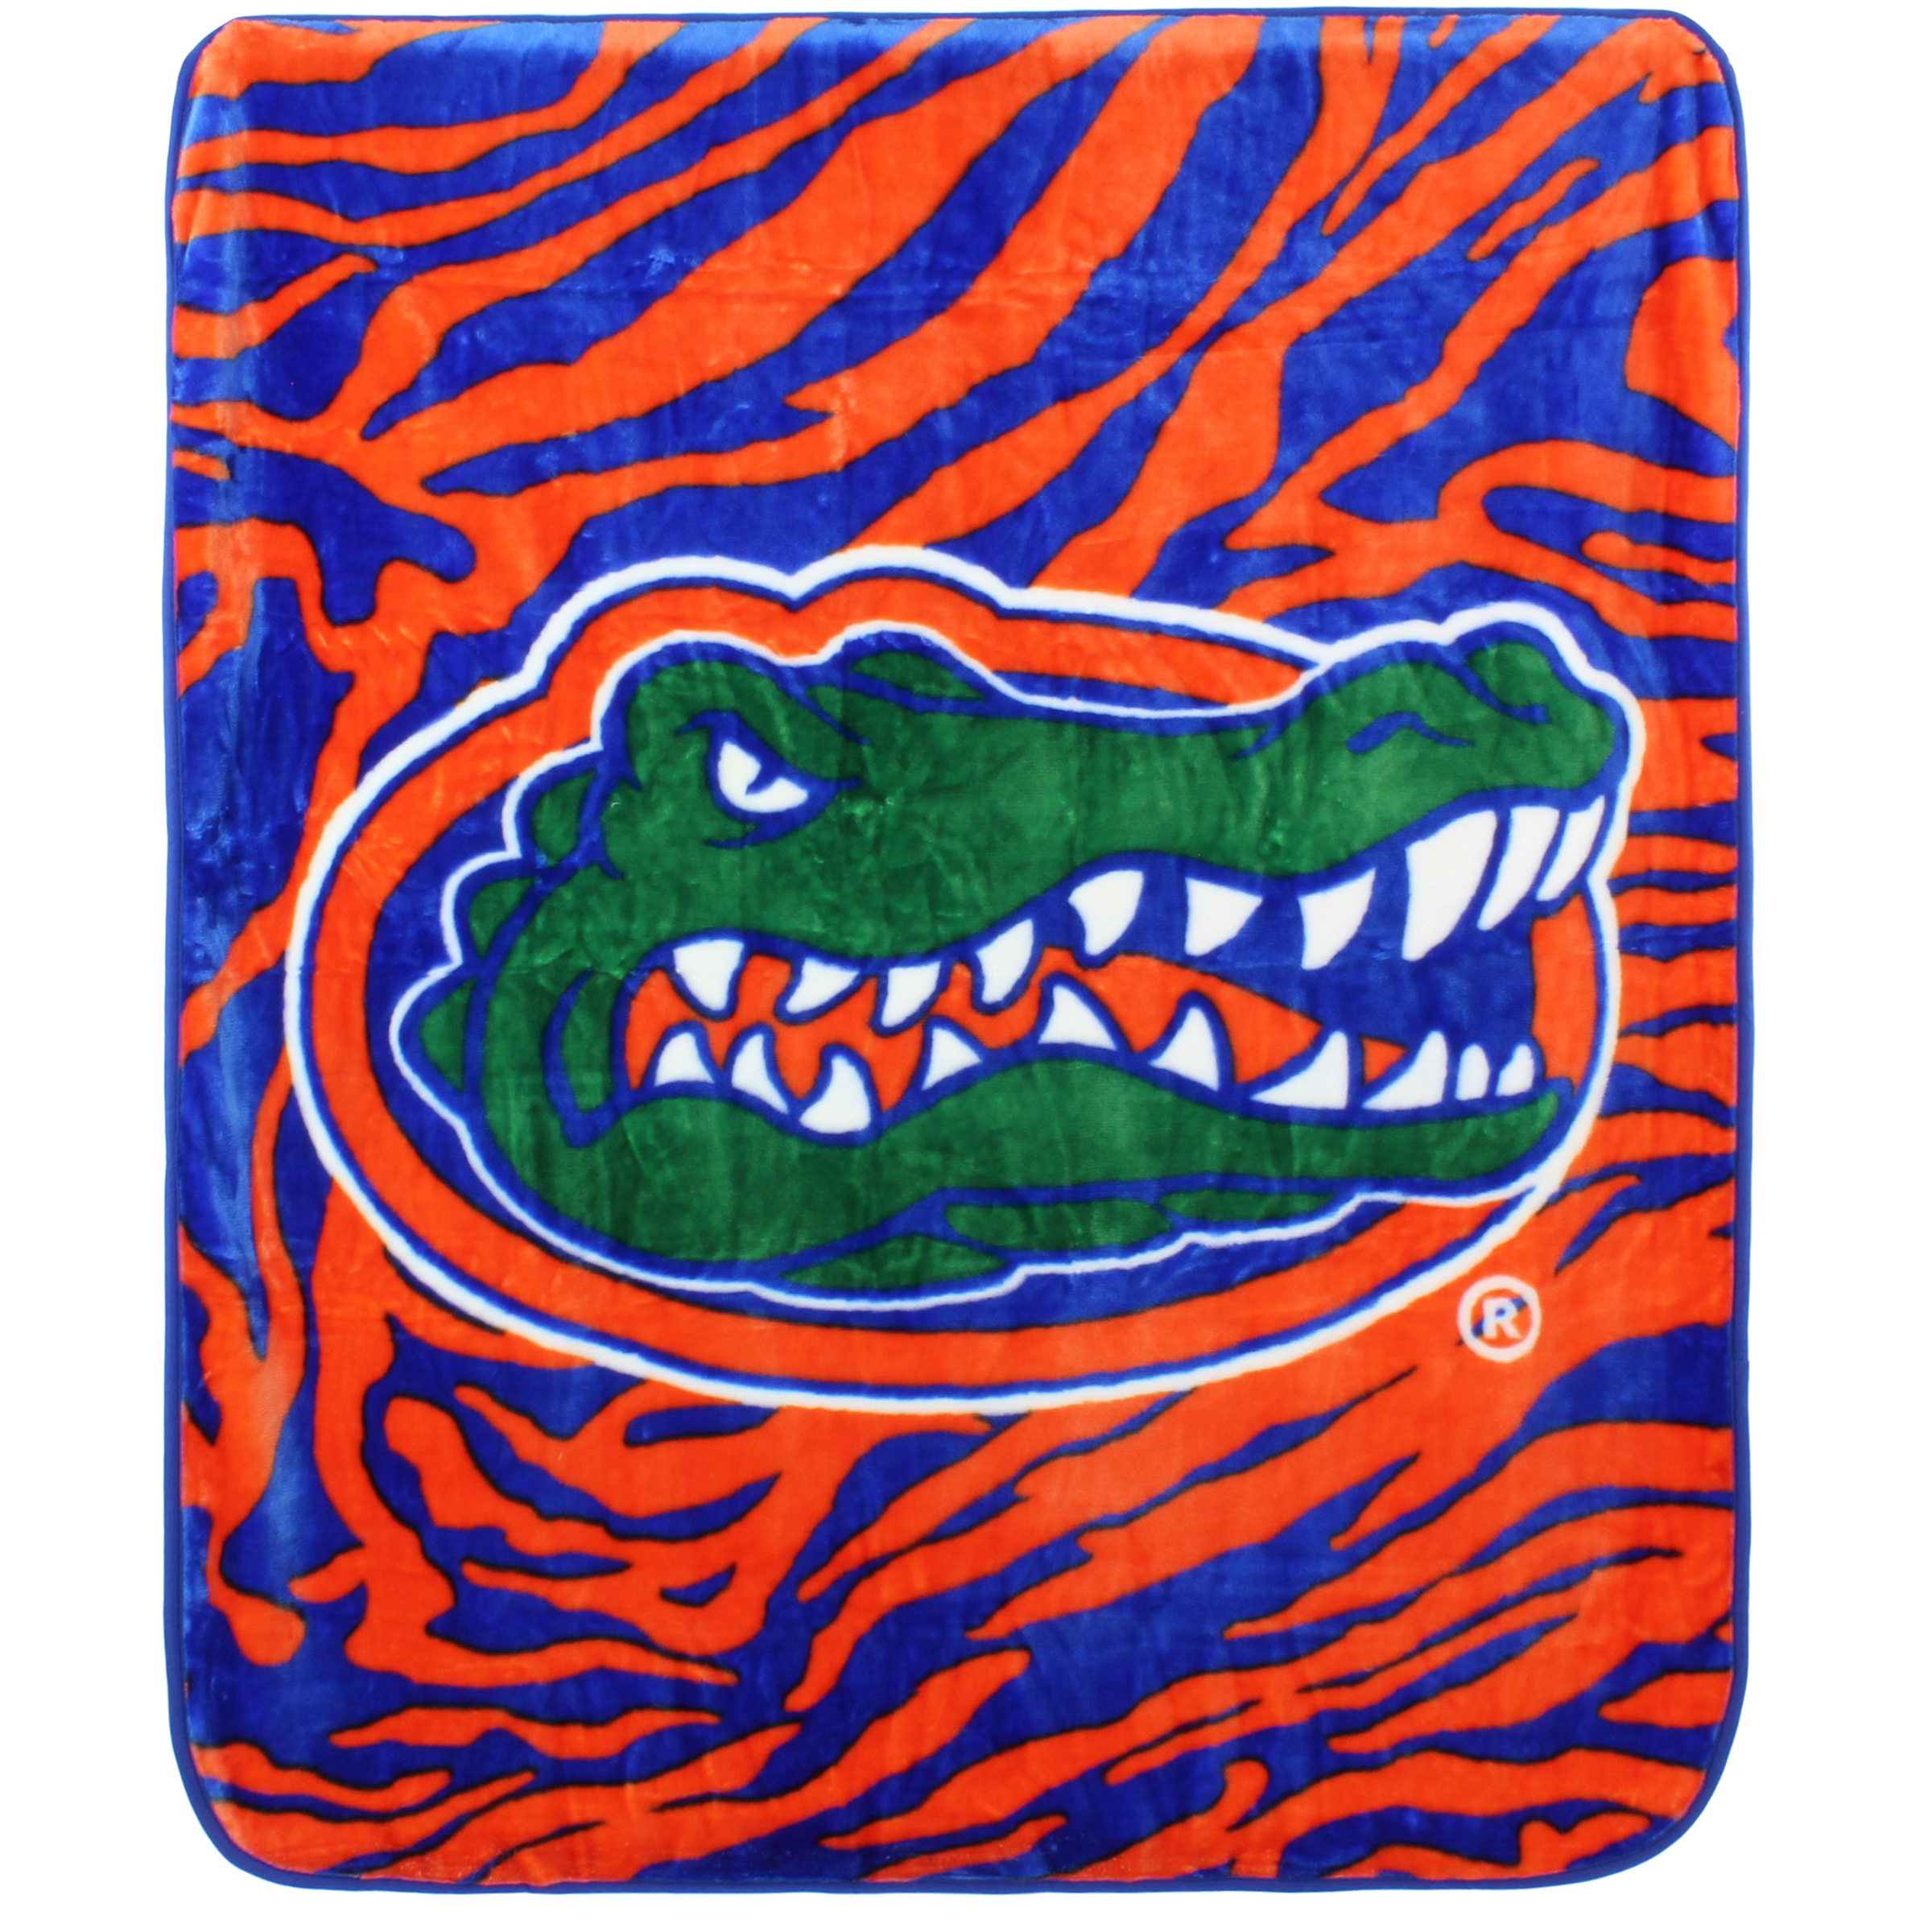 College Covers Everything Comfy Florida Gators Soft Raschel Throw Blanket, 60" x 50" - image 1 of 6